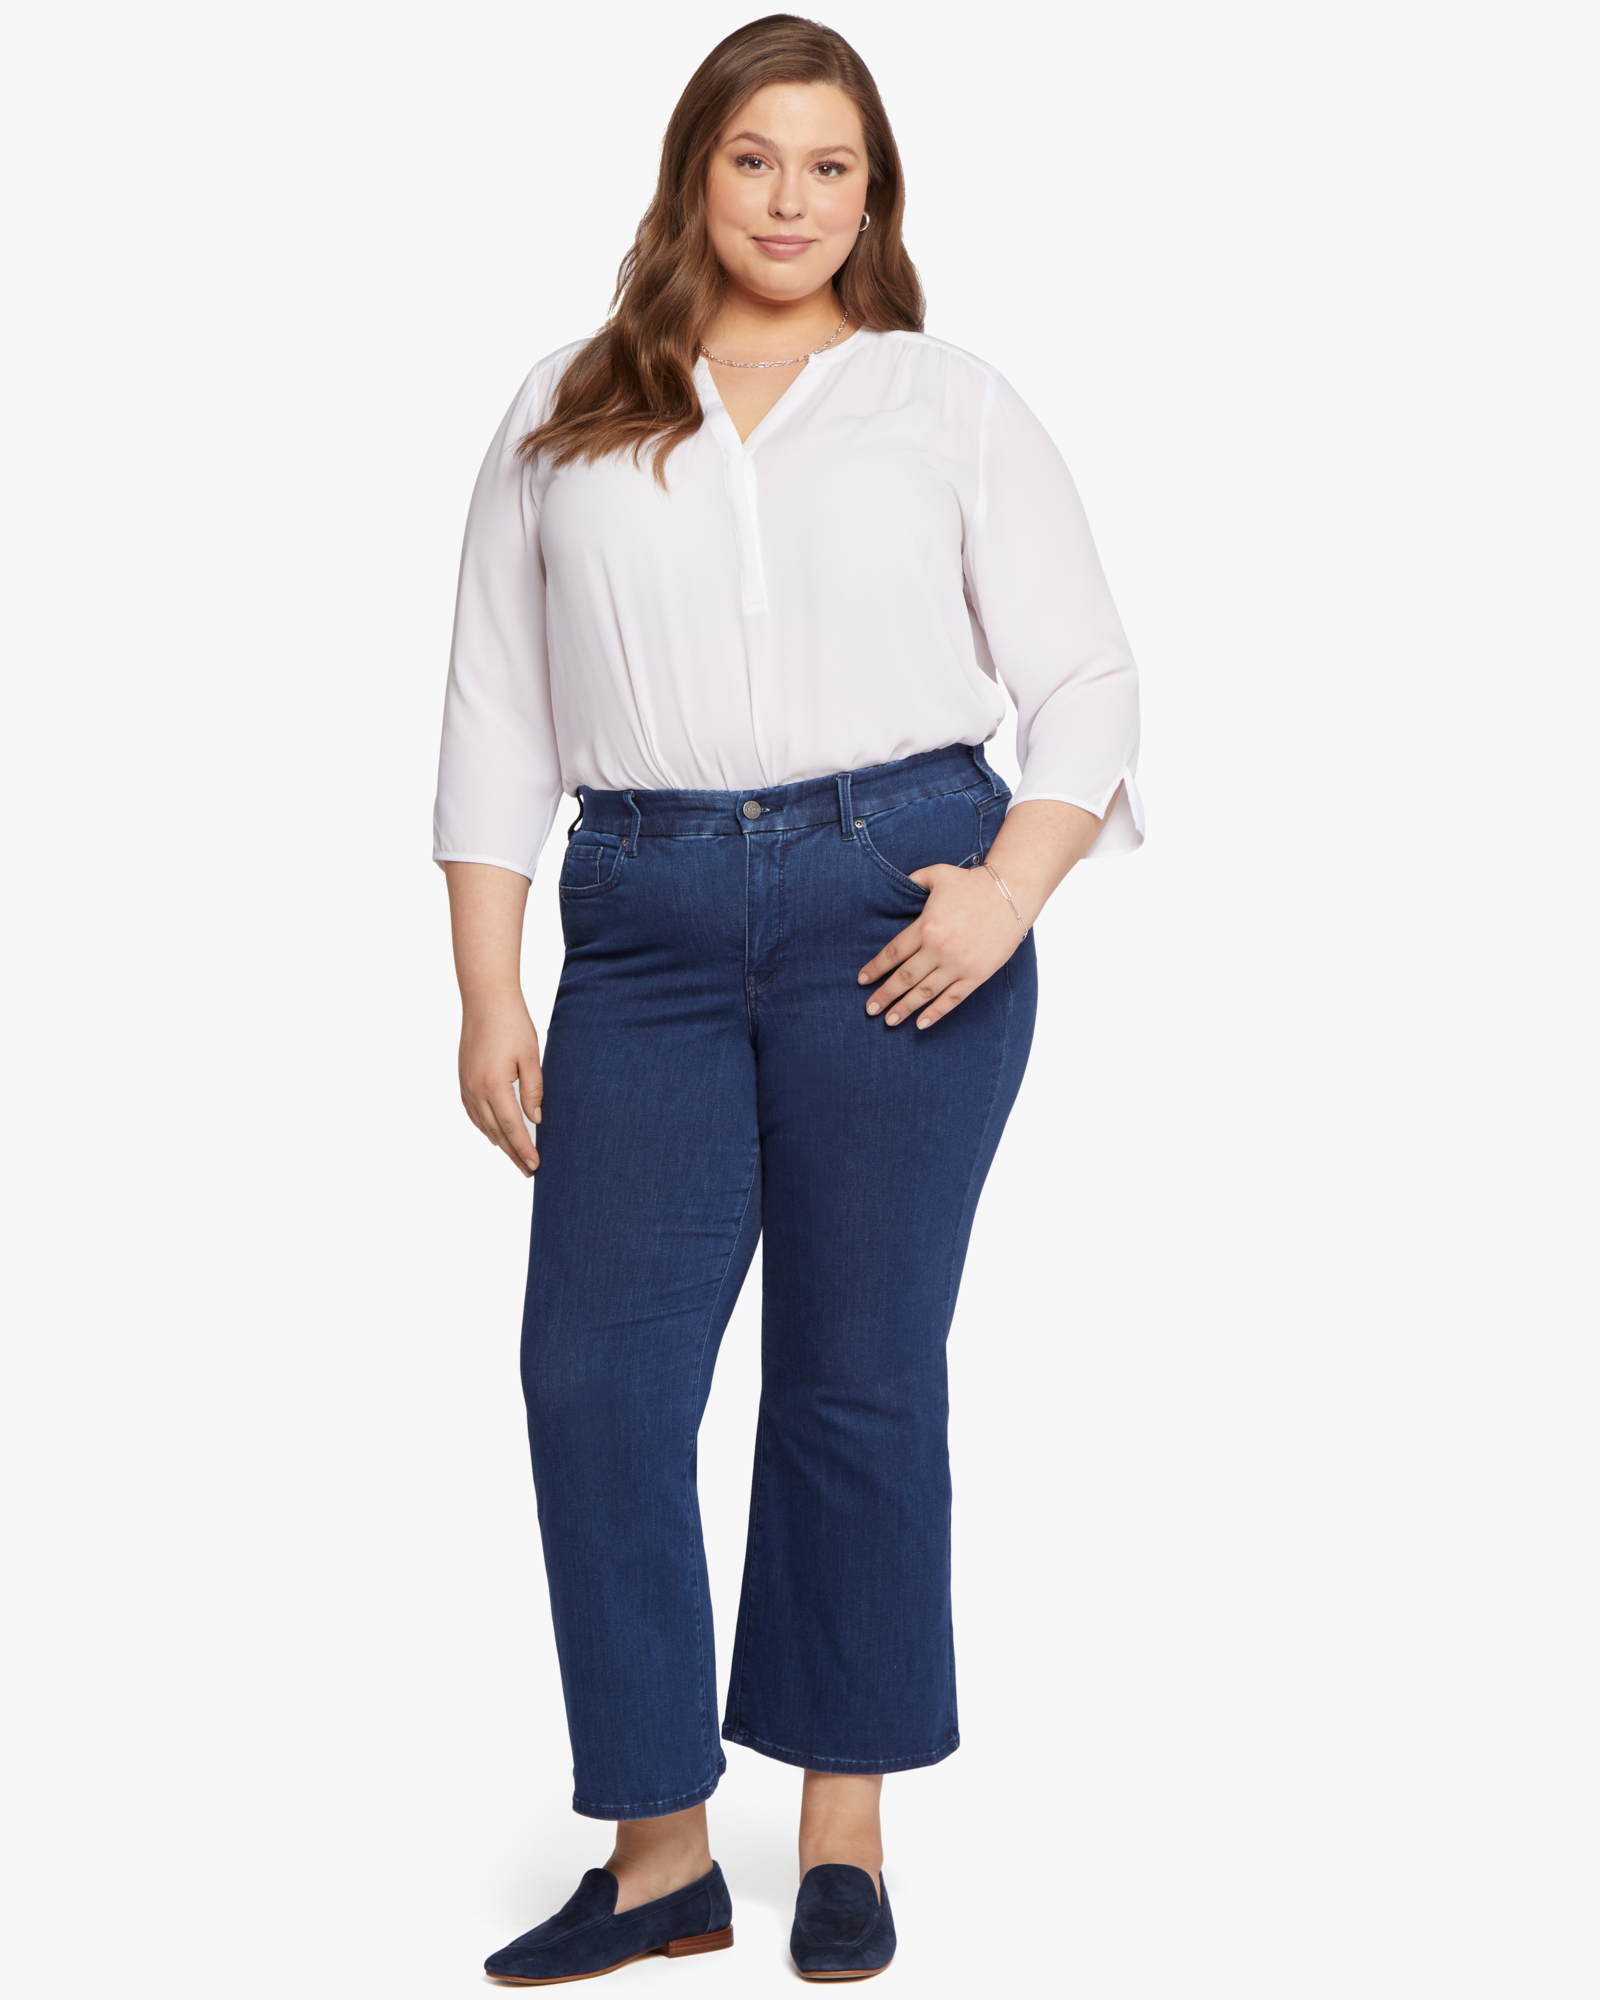 Plus Size High Waisted Flare Pants